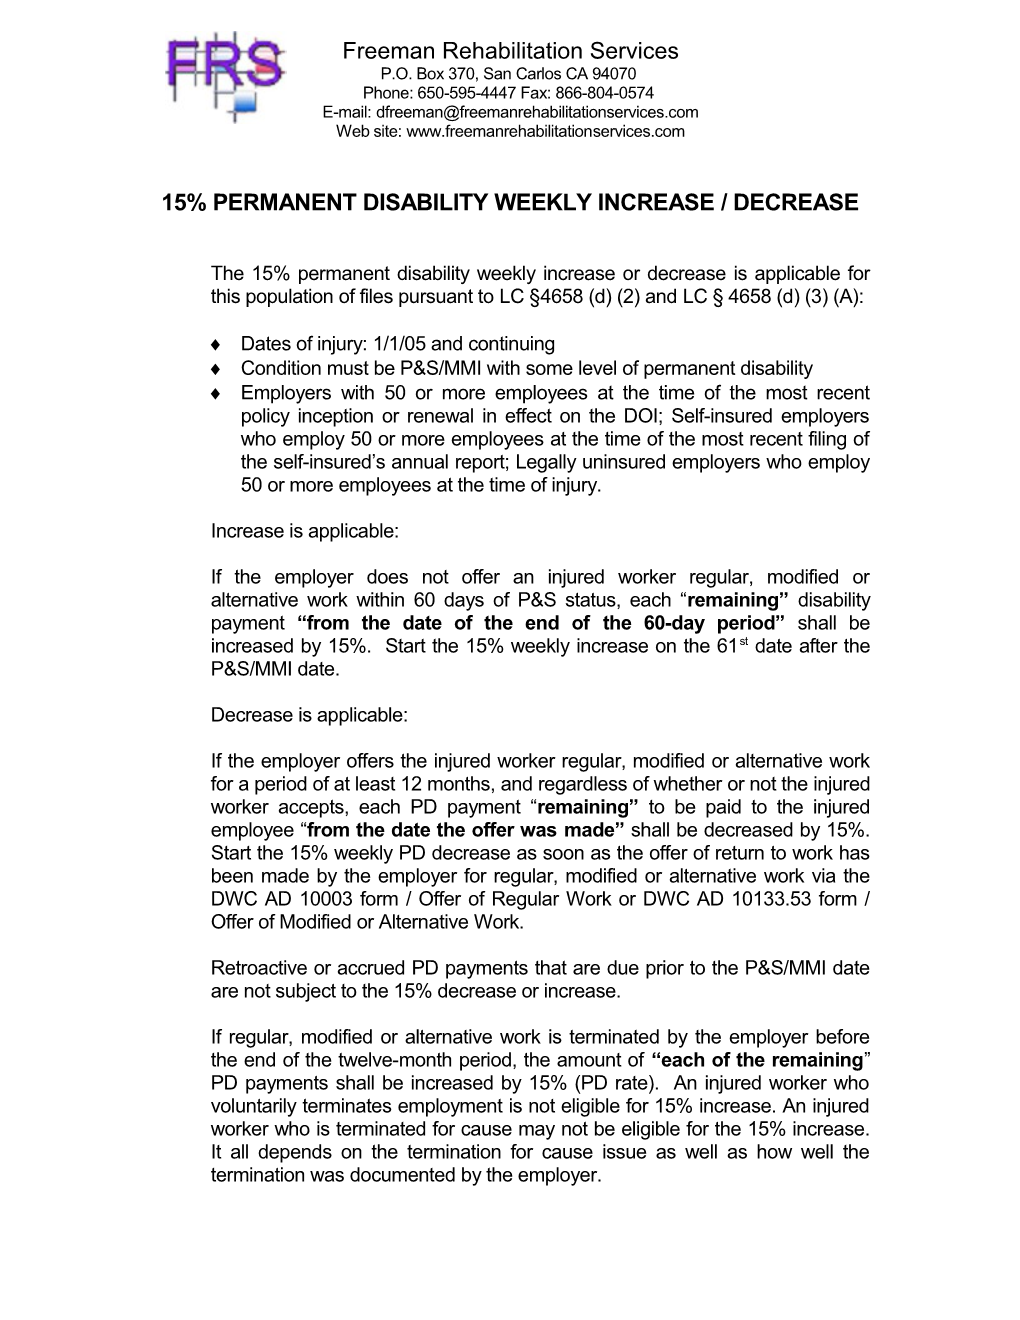 15% Permanent Disability Weekly Increase / Decrease